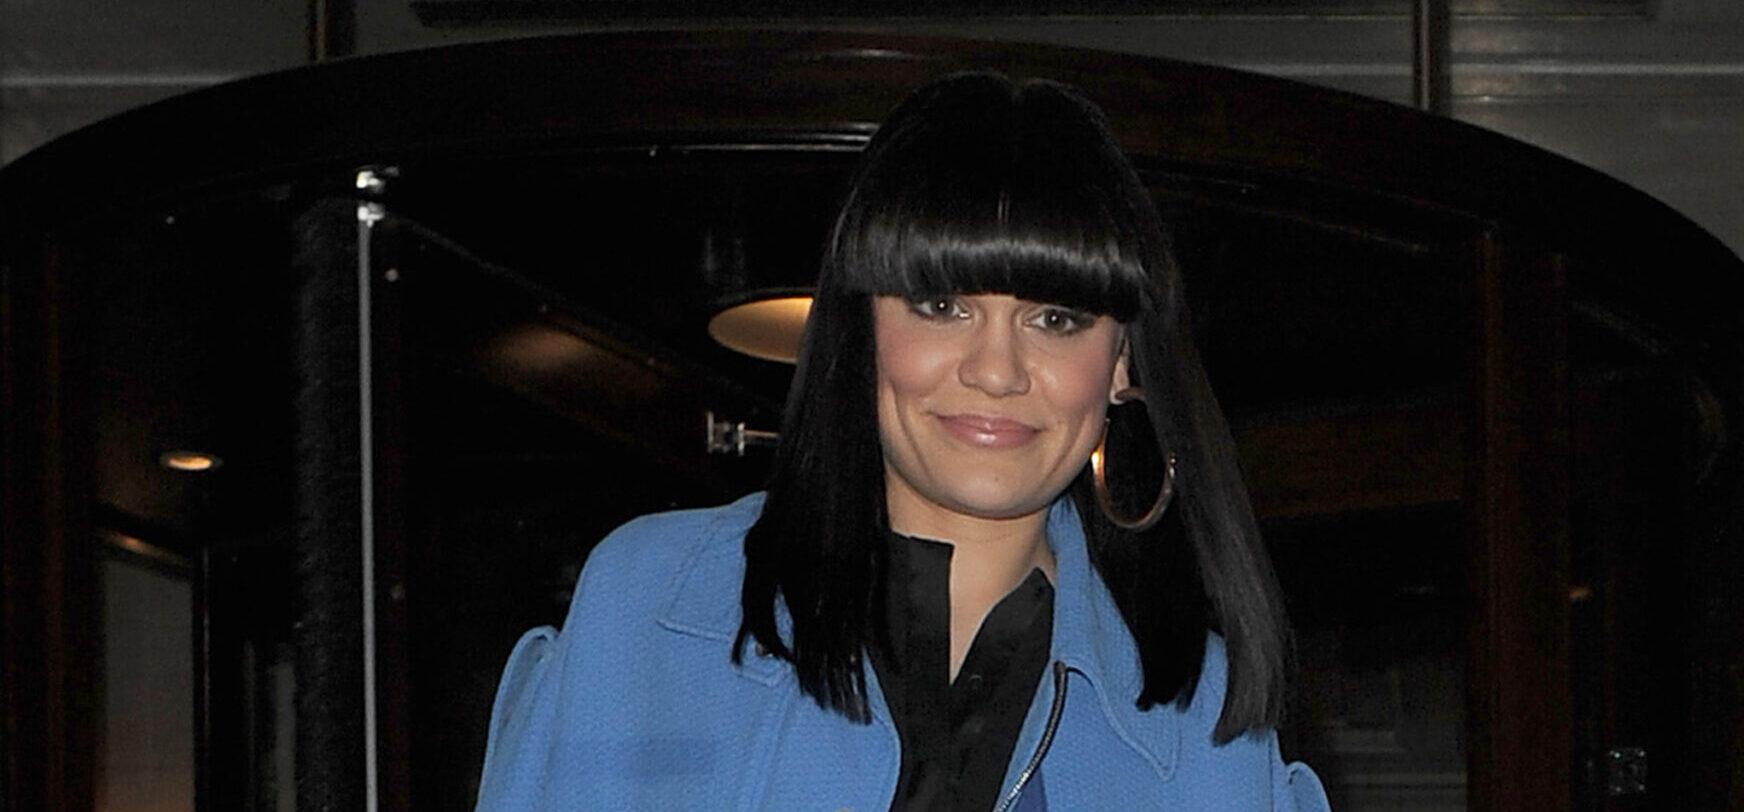 Jessie J leaving The Berkeley Hotel in Knightsbridge The singer wore a blue jacket black leather trousers and carried a grey handbag